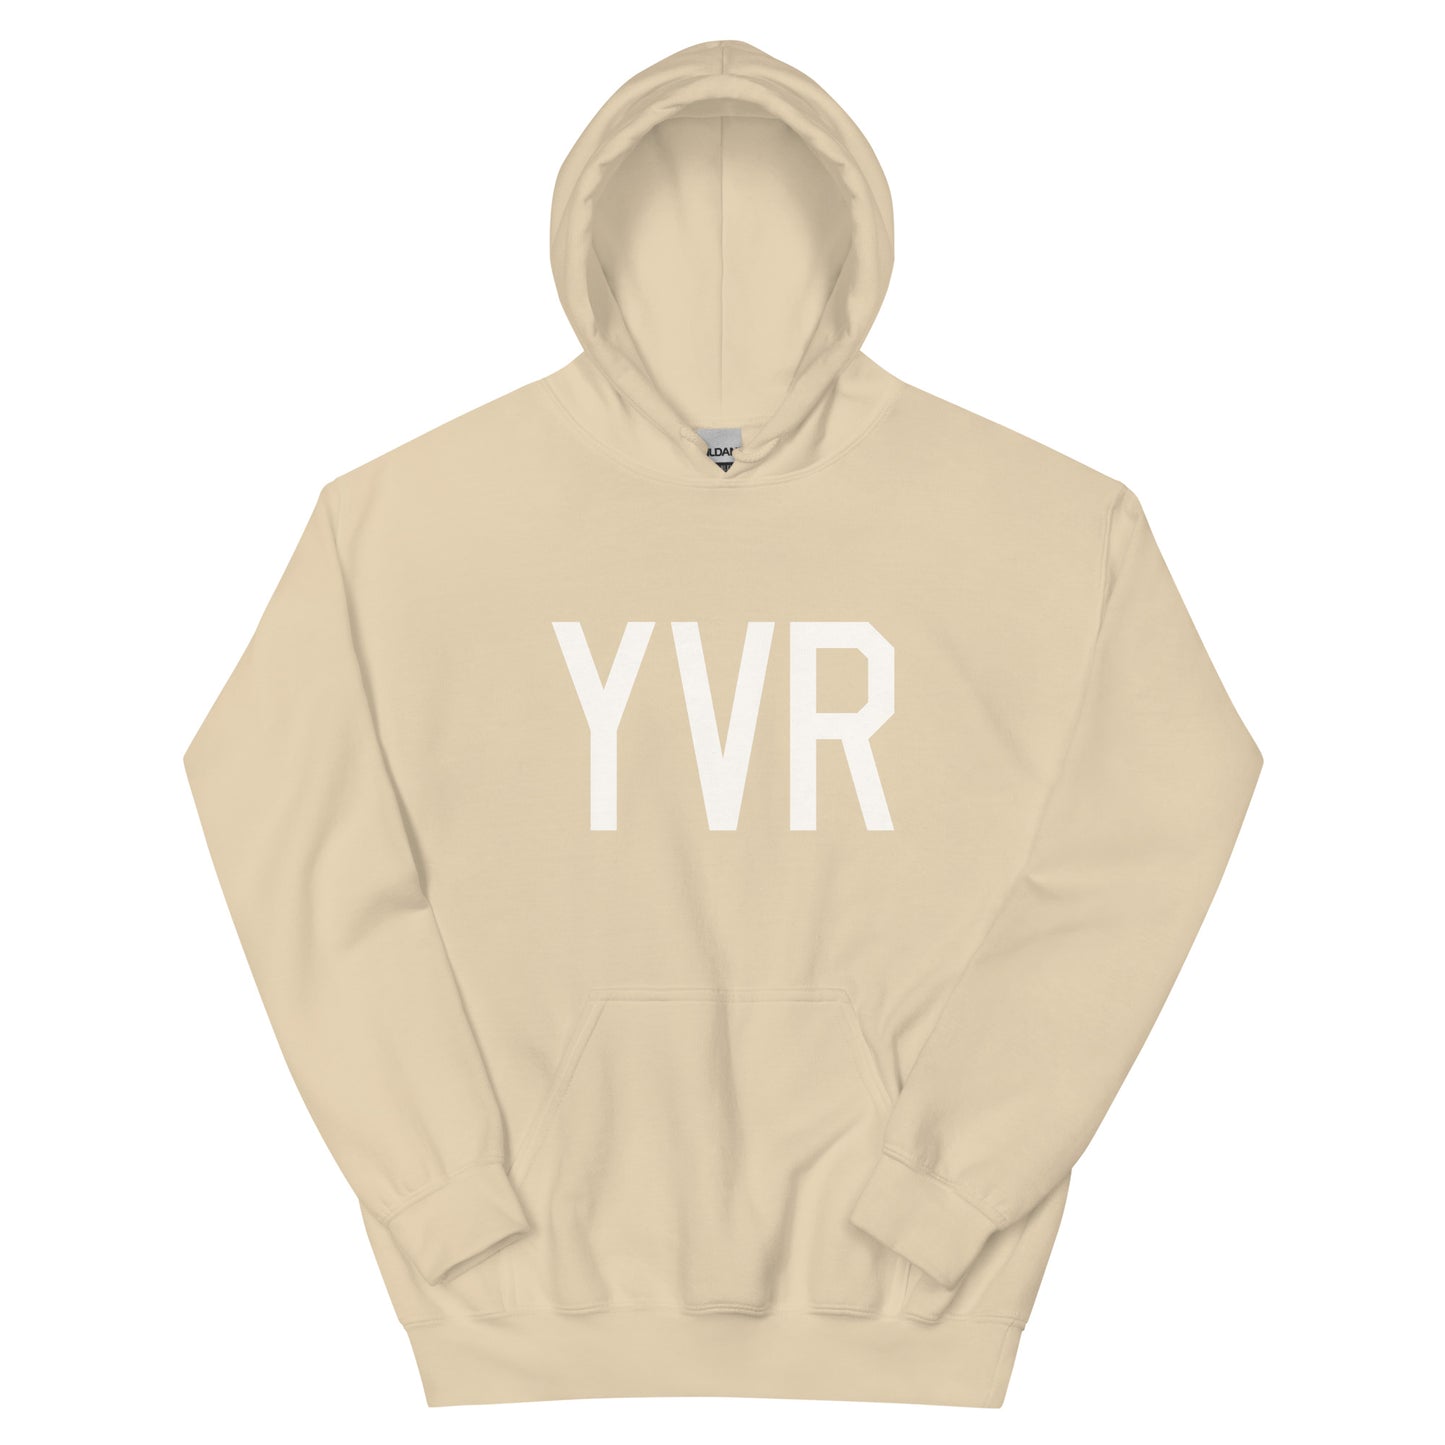 Unisex Hoodie - White Graphic • YVR Vancouver • YHM Designs - Image 06